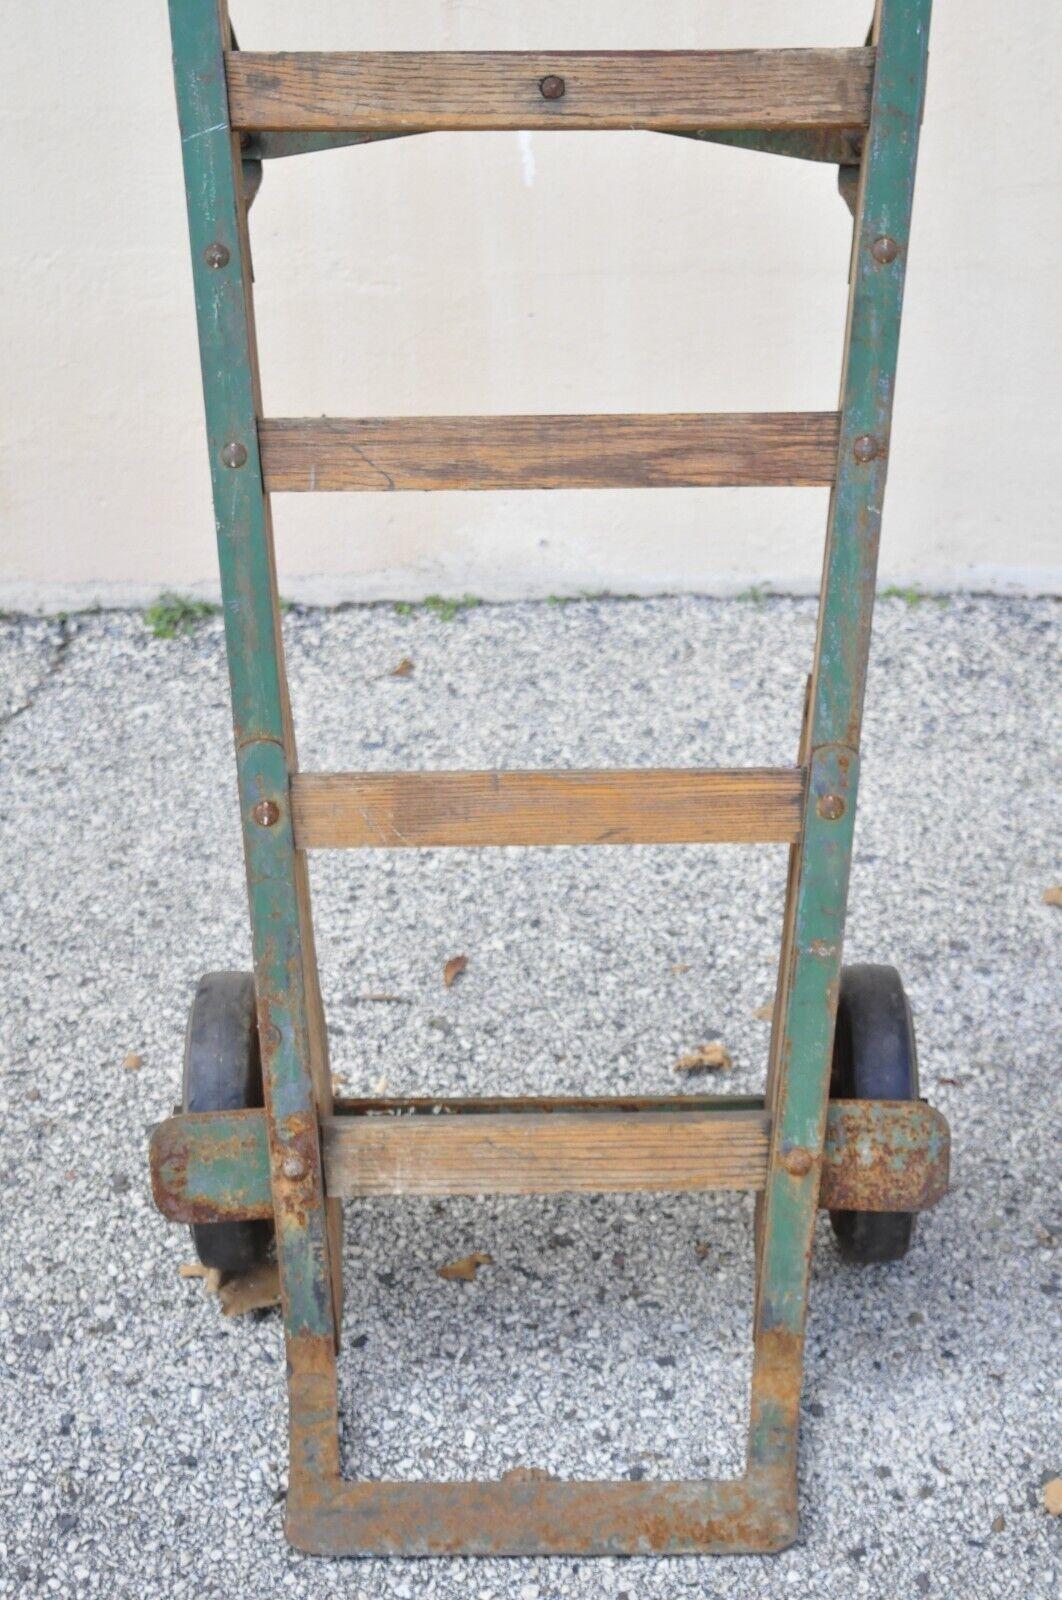 Antique American Industrial Oak Wood and Metal Hand Cart Hand Truck Dolly 5